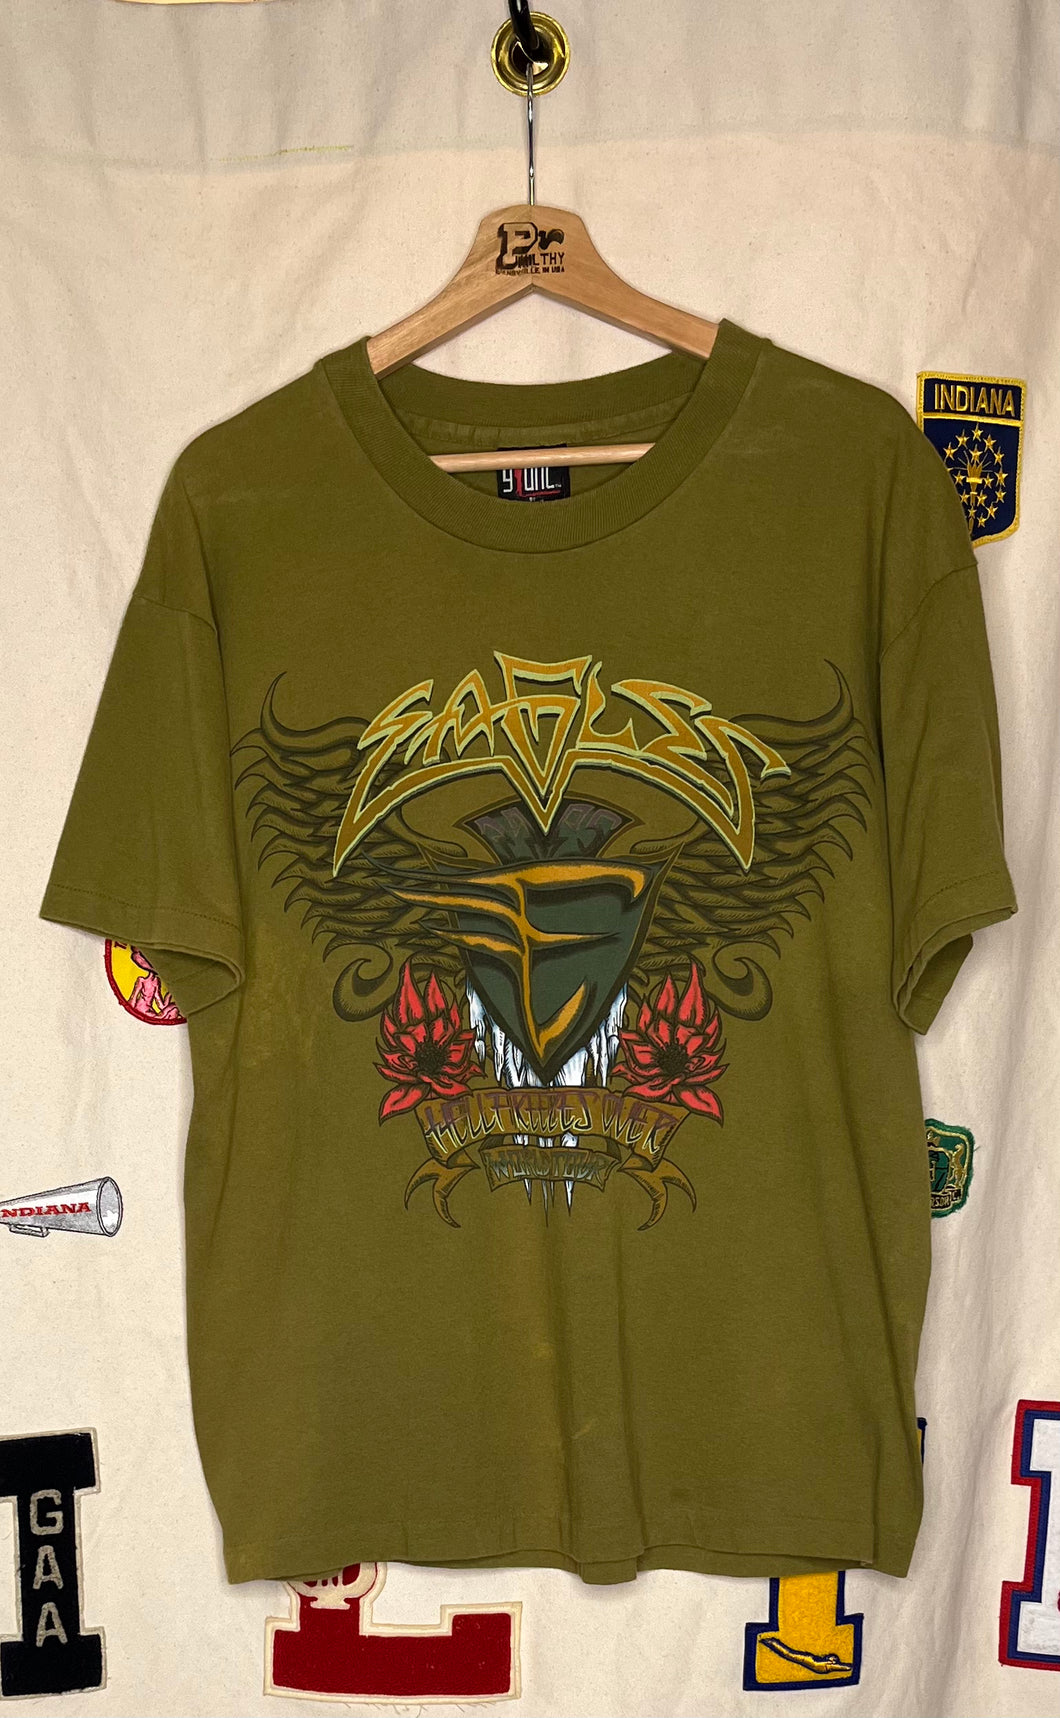 1995 Eagles Hell Freezes Over Tour T-Shirt: L